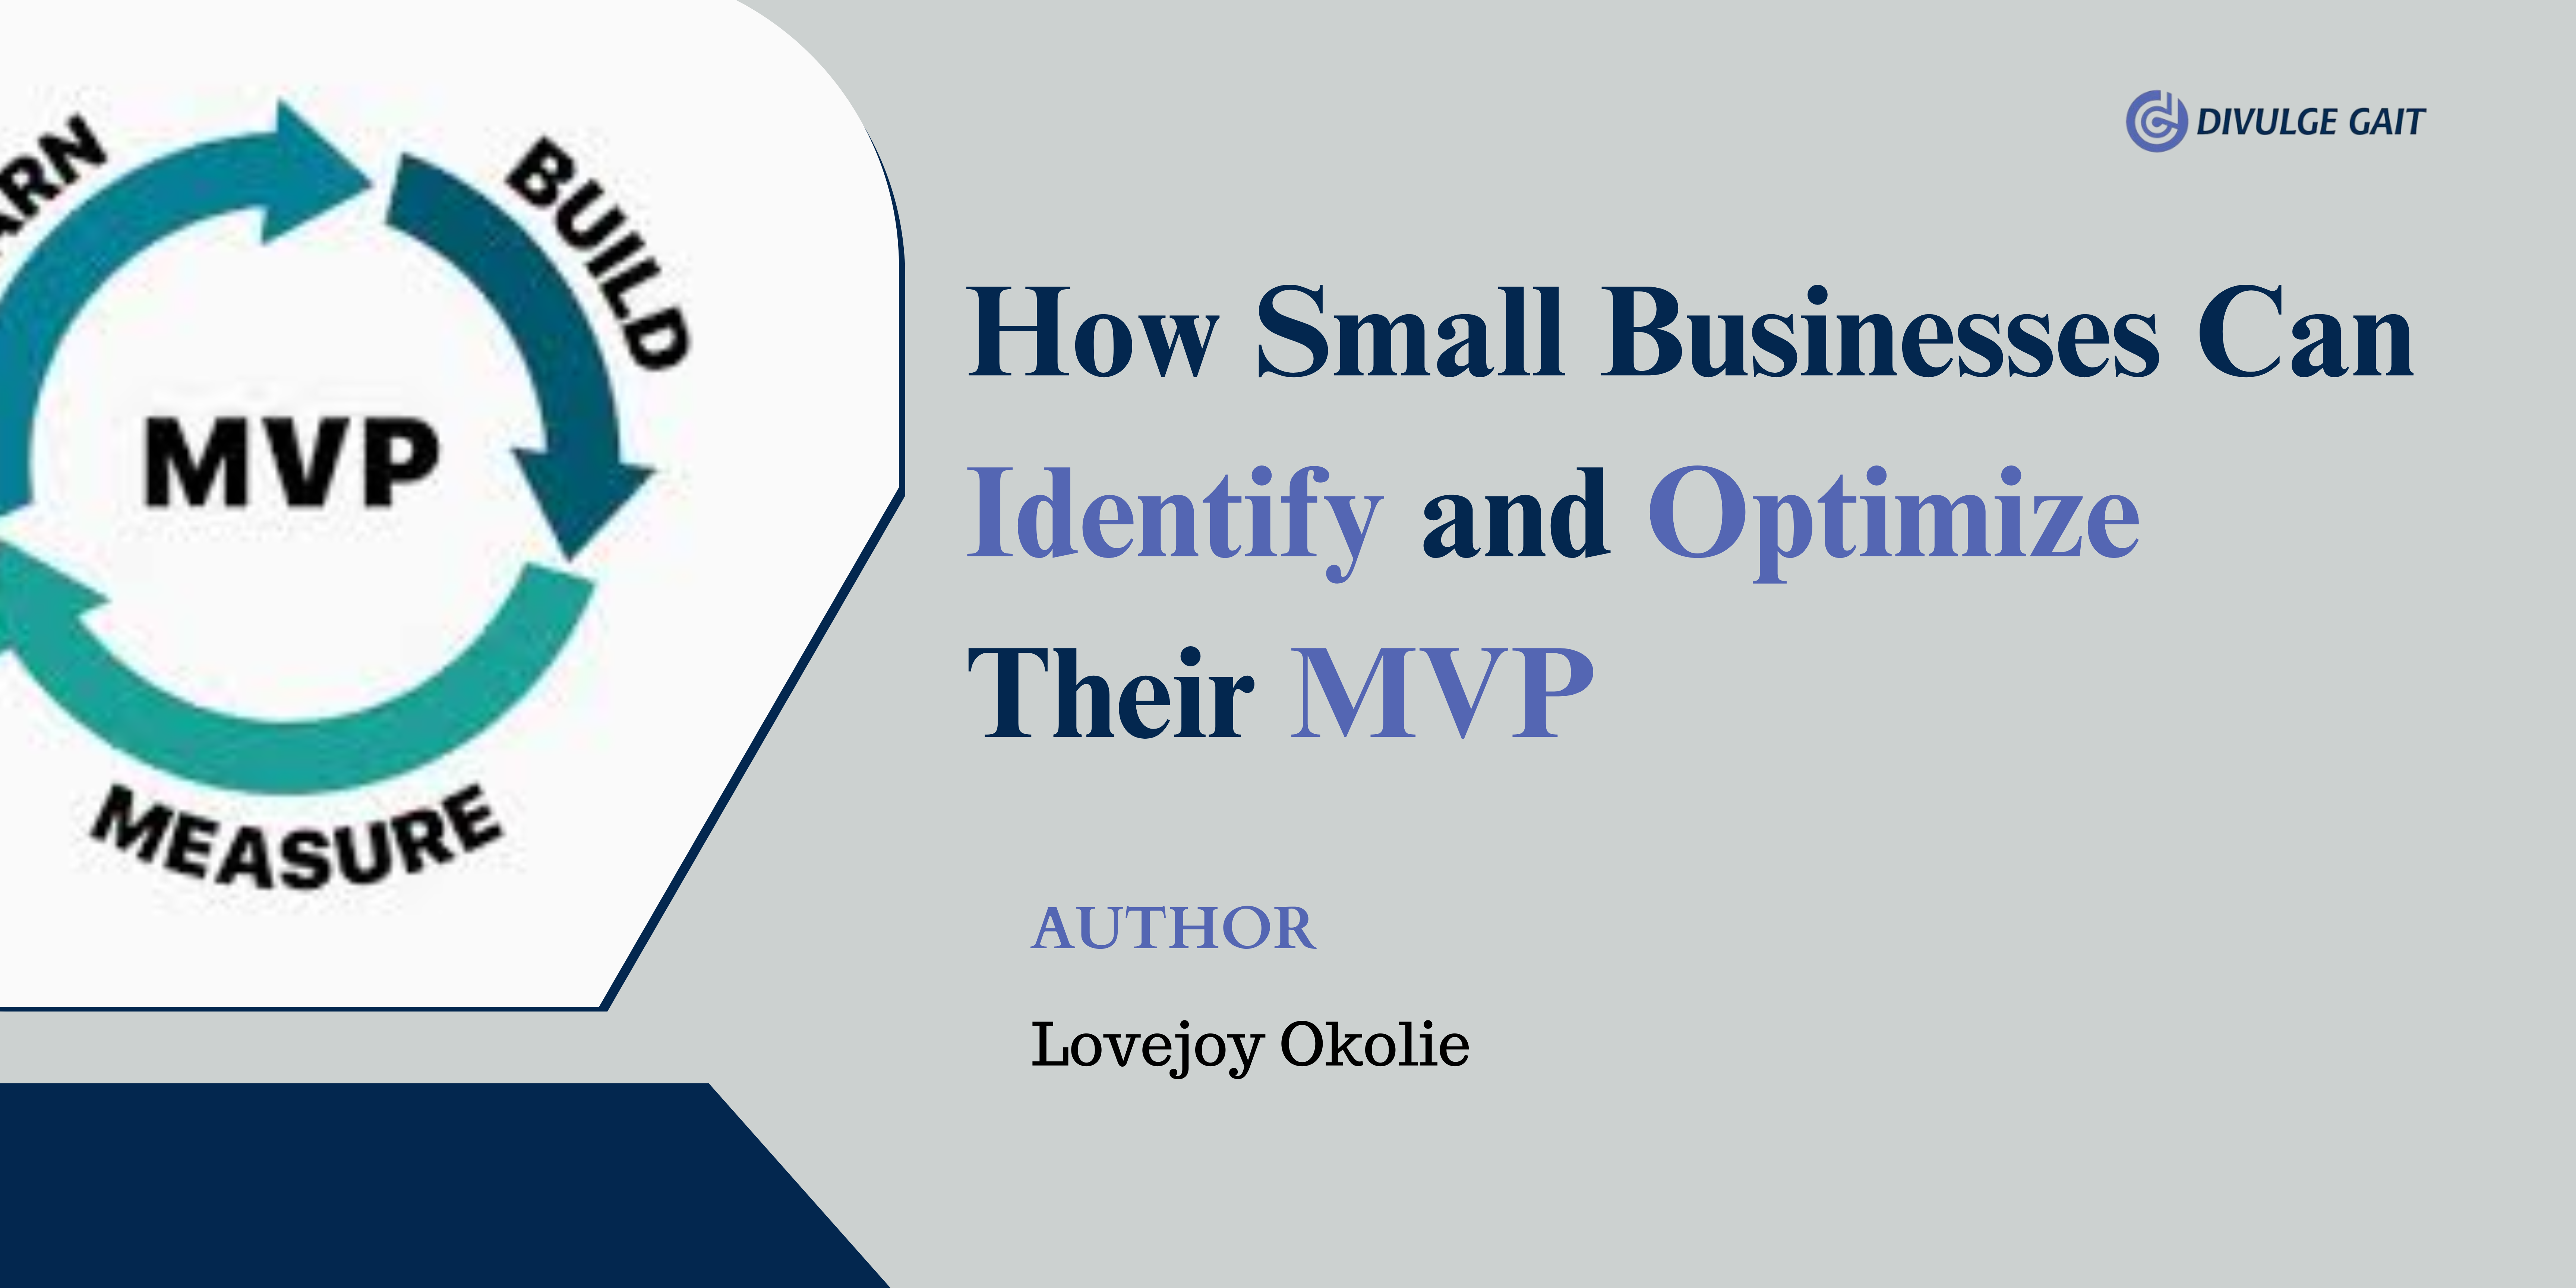 How Small Businesses Can Identify and Optimize Their MVP.